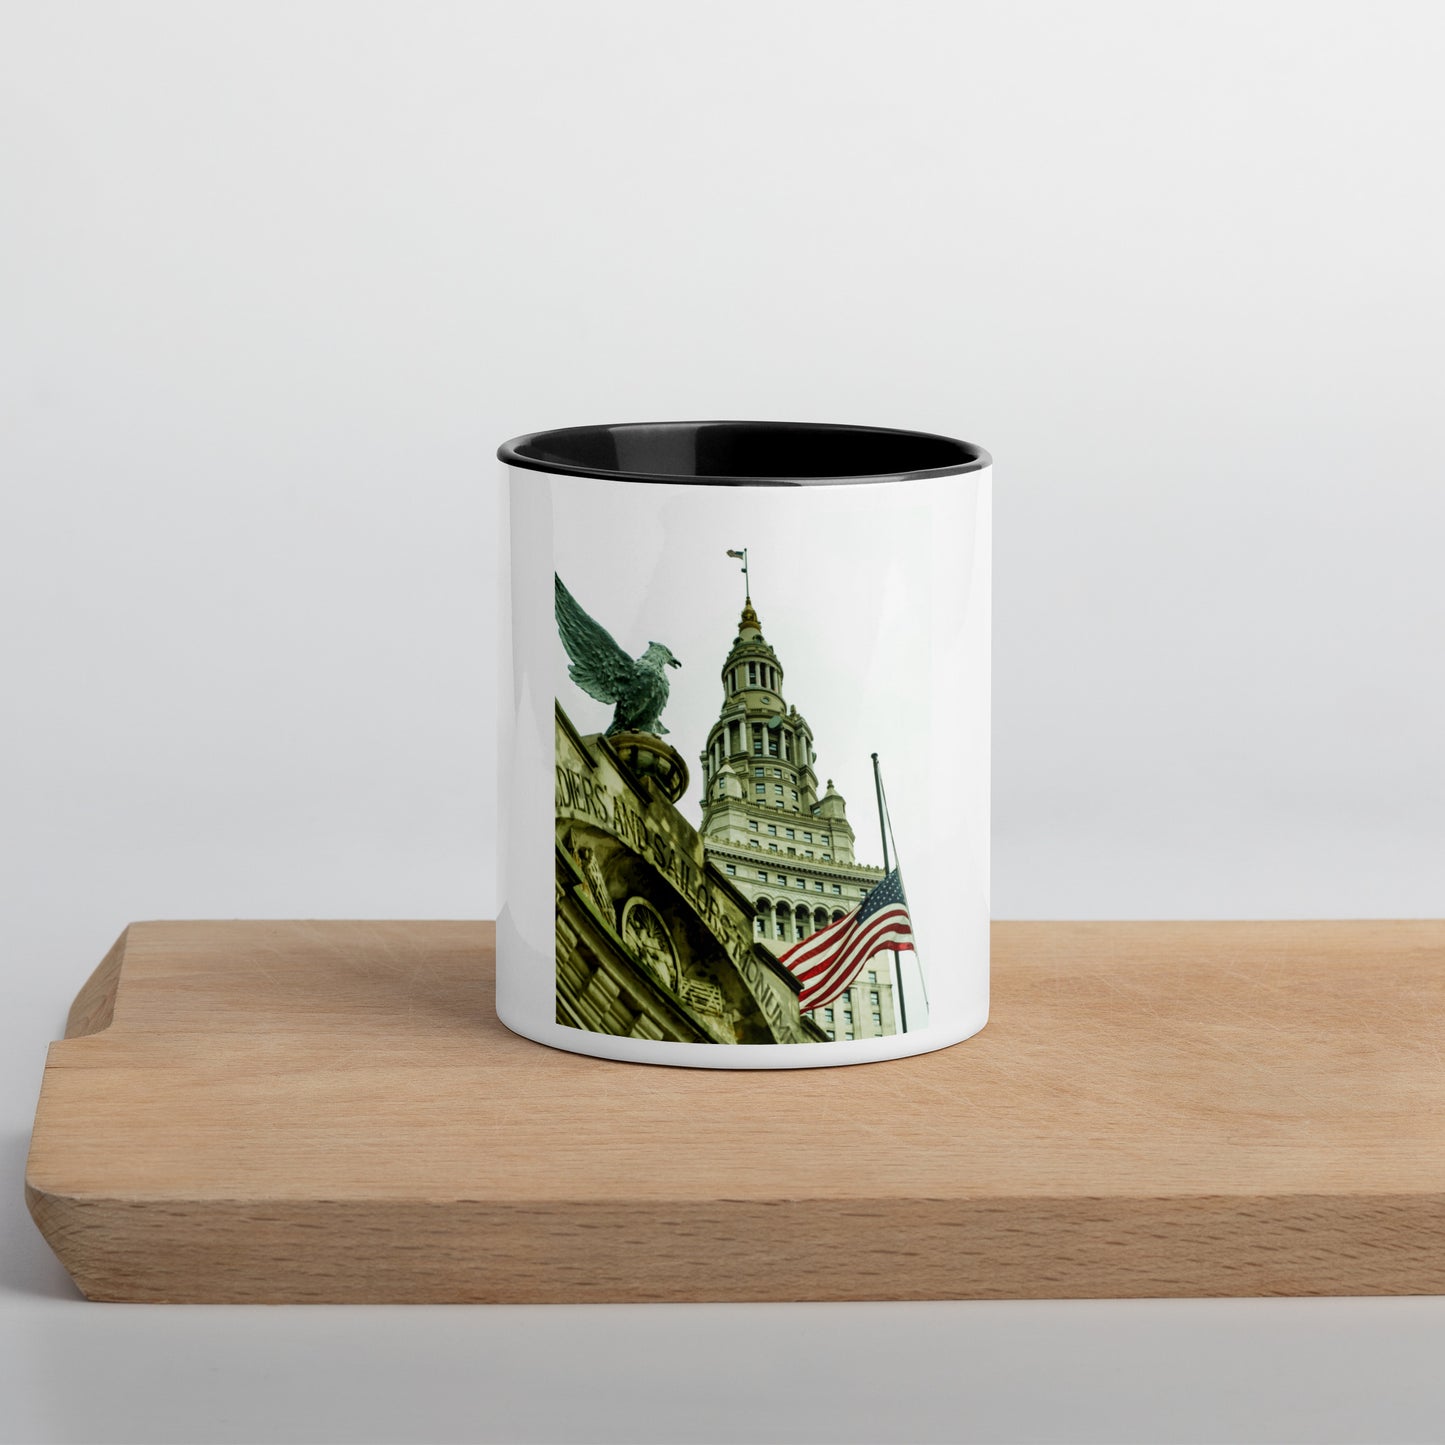 Picture Keepsake Gifts: Soldiers' Sailors' Monument Mug (with Color Inside)